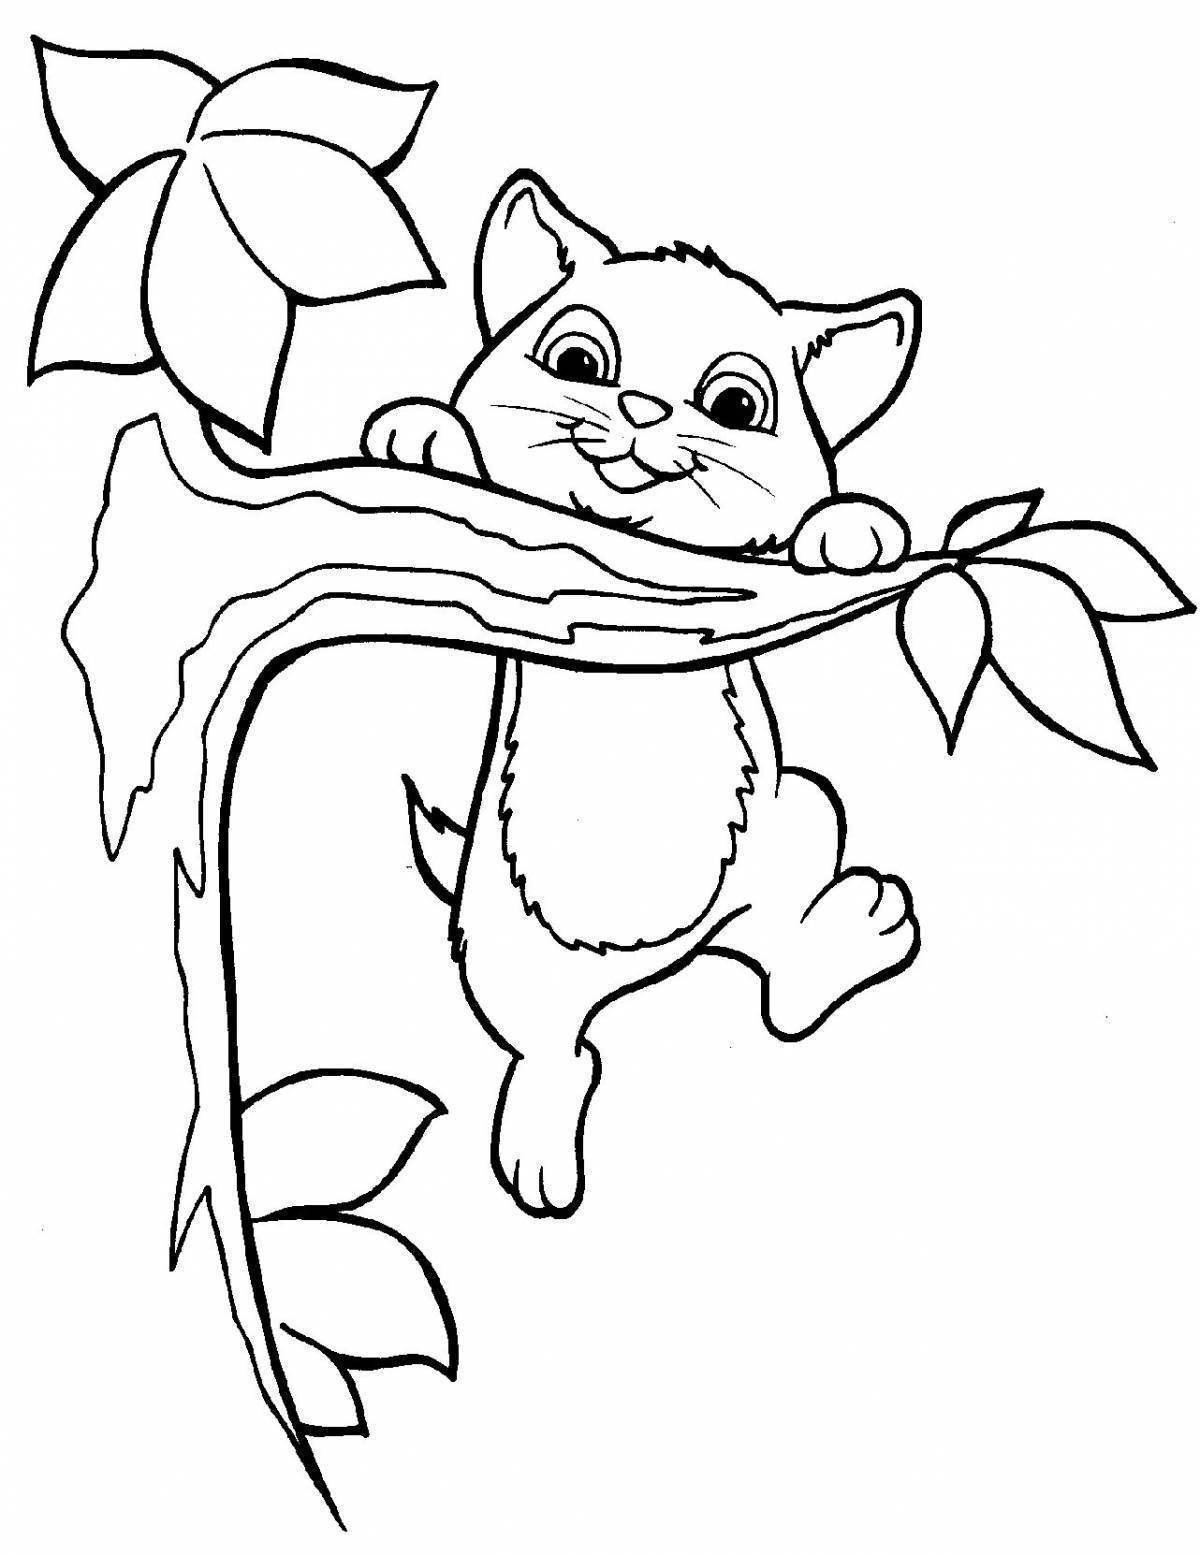 Coloring page playful cat and bee